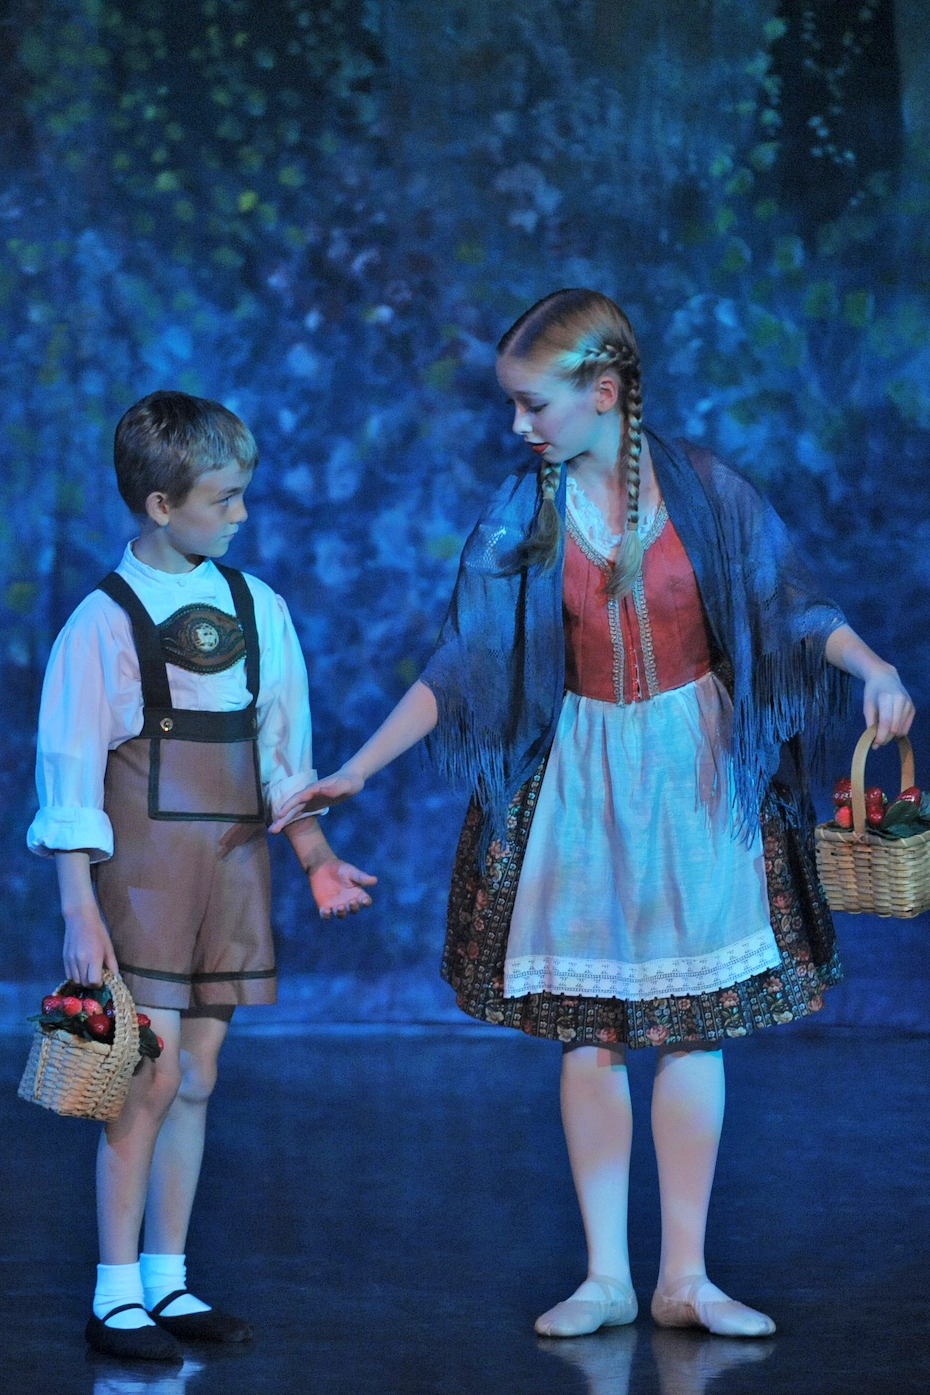 Hansel and Gretel, Festive Events, What's On